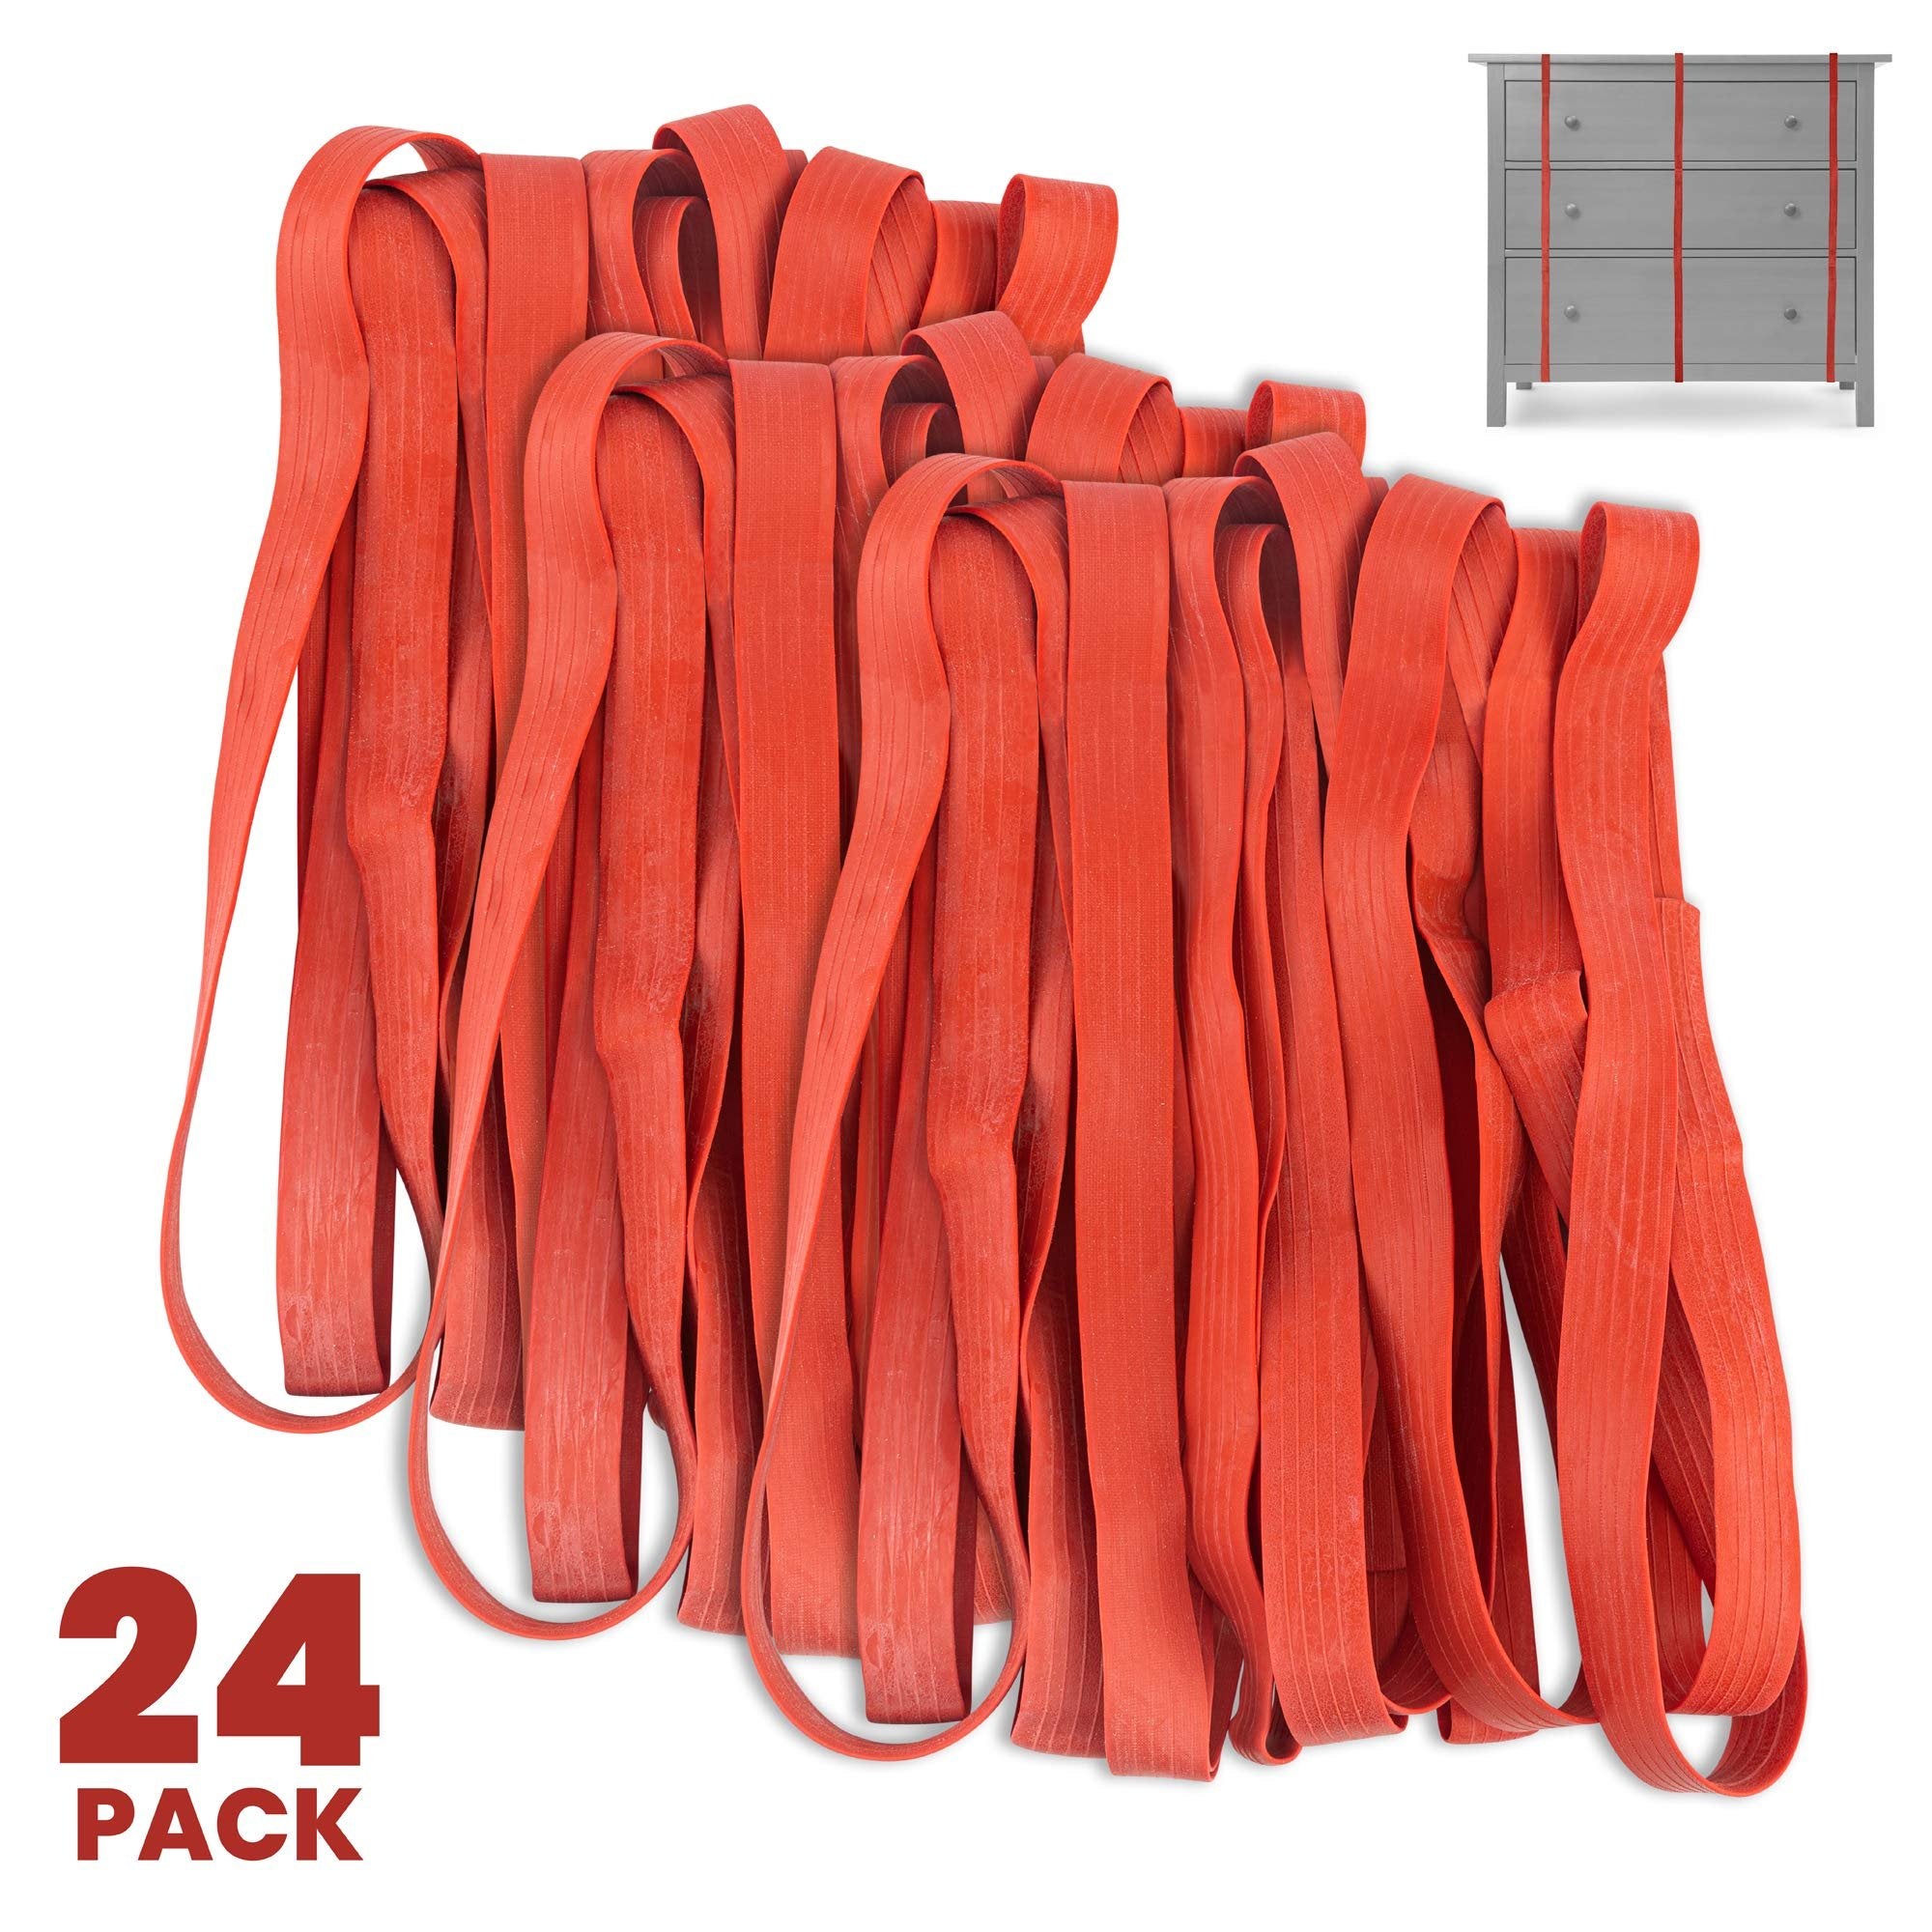 24 Pack Extra Large Mover Rubber Bands - 42" Length Extra Strength - Pallet Band or Moving Blanket Band - by Kitchentoolz (Pack of 24)